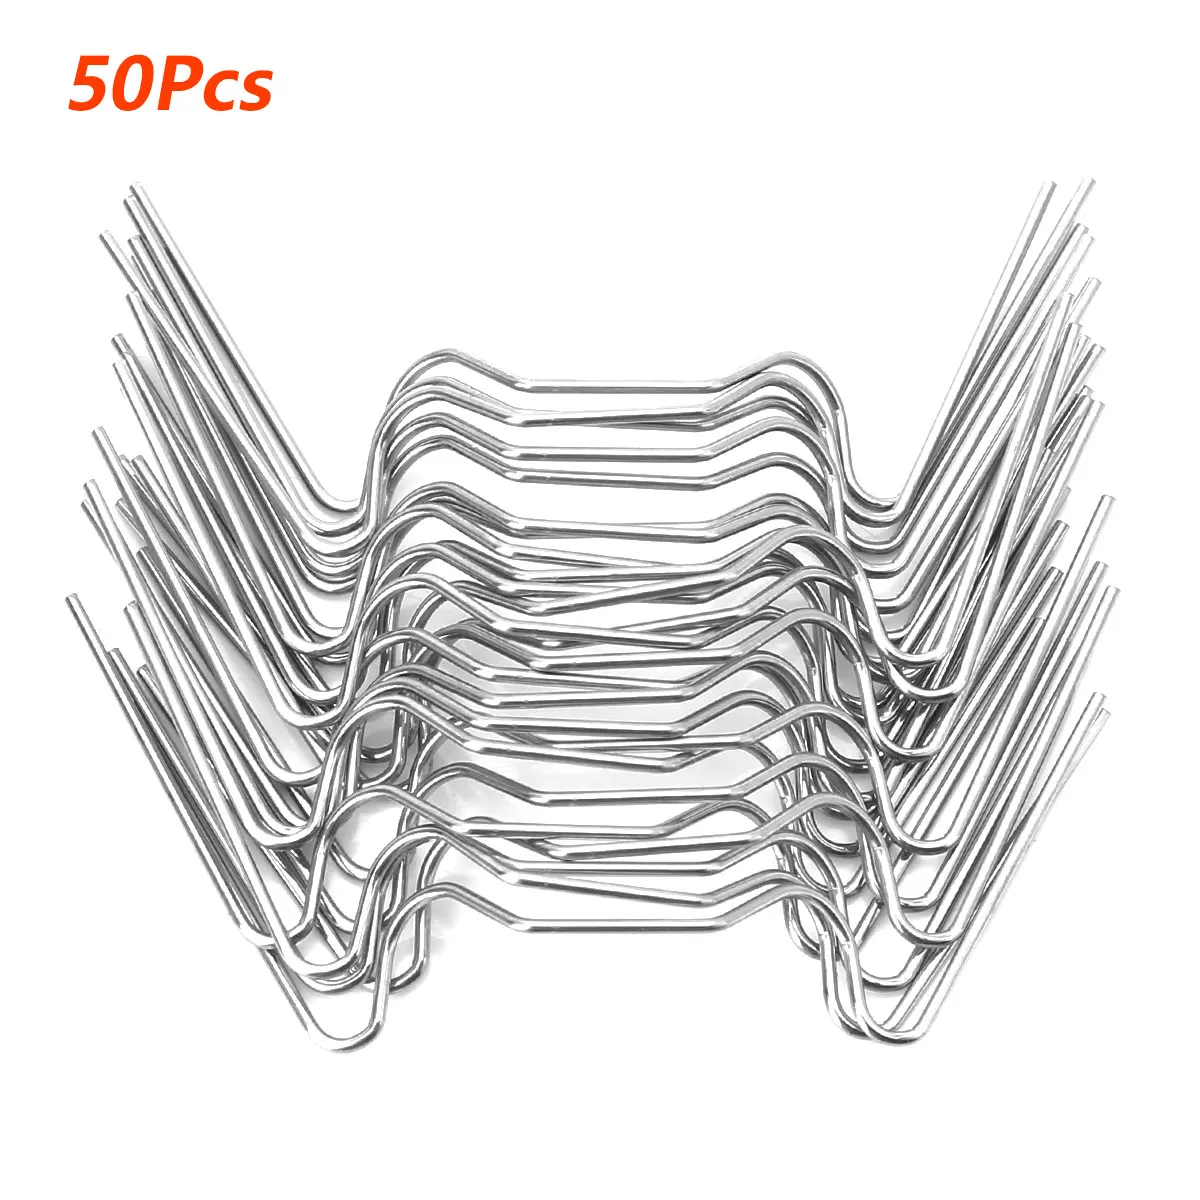 50Pcs W Glazing Glass Clips Stainless Steel Use Fttings for Greenhouse